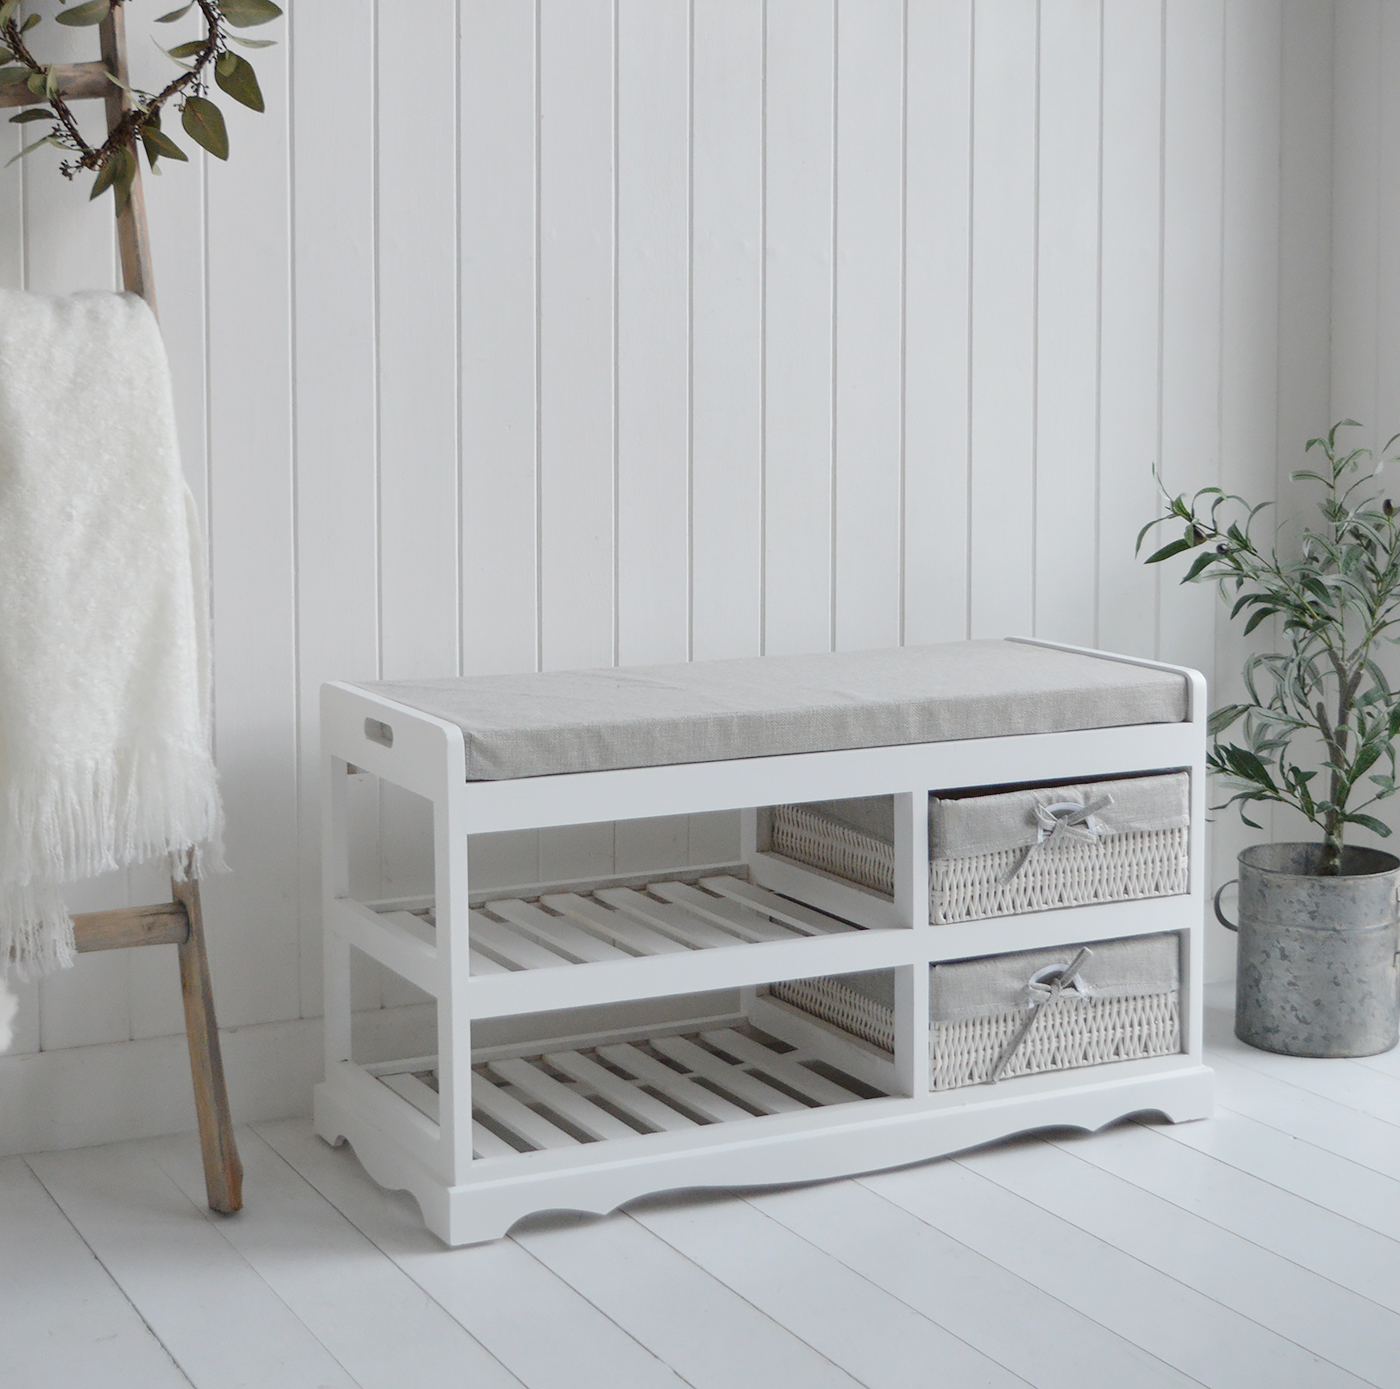 Cape Cod white hall shoe bench with shelves, cushion and baskets- New England Modern Farmhouse and Coastal Furniture